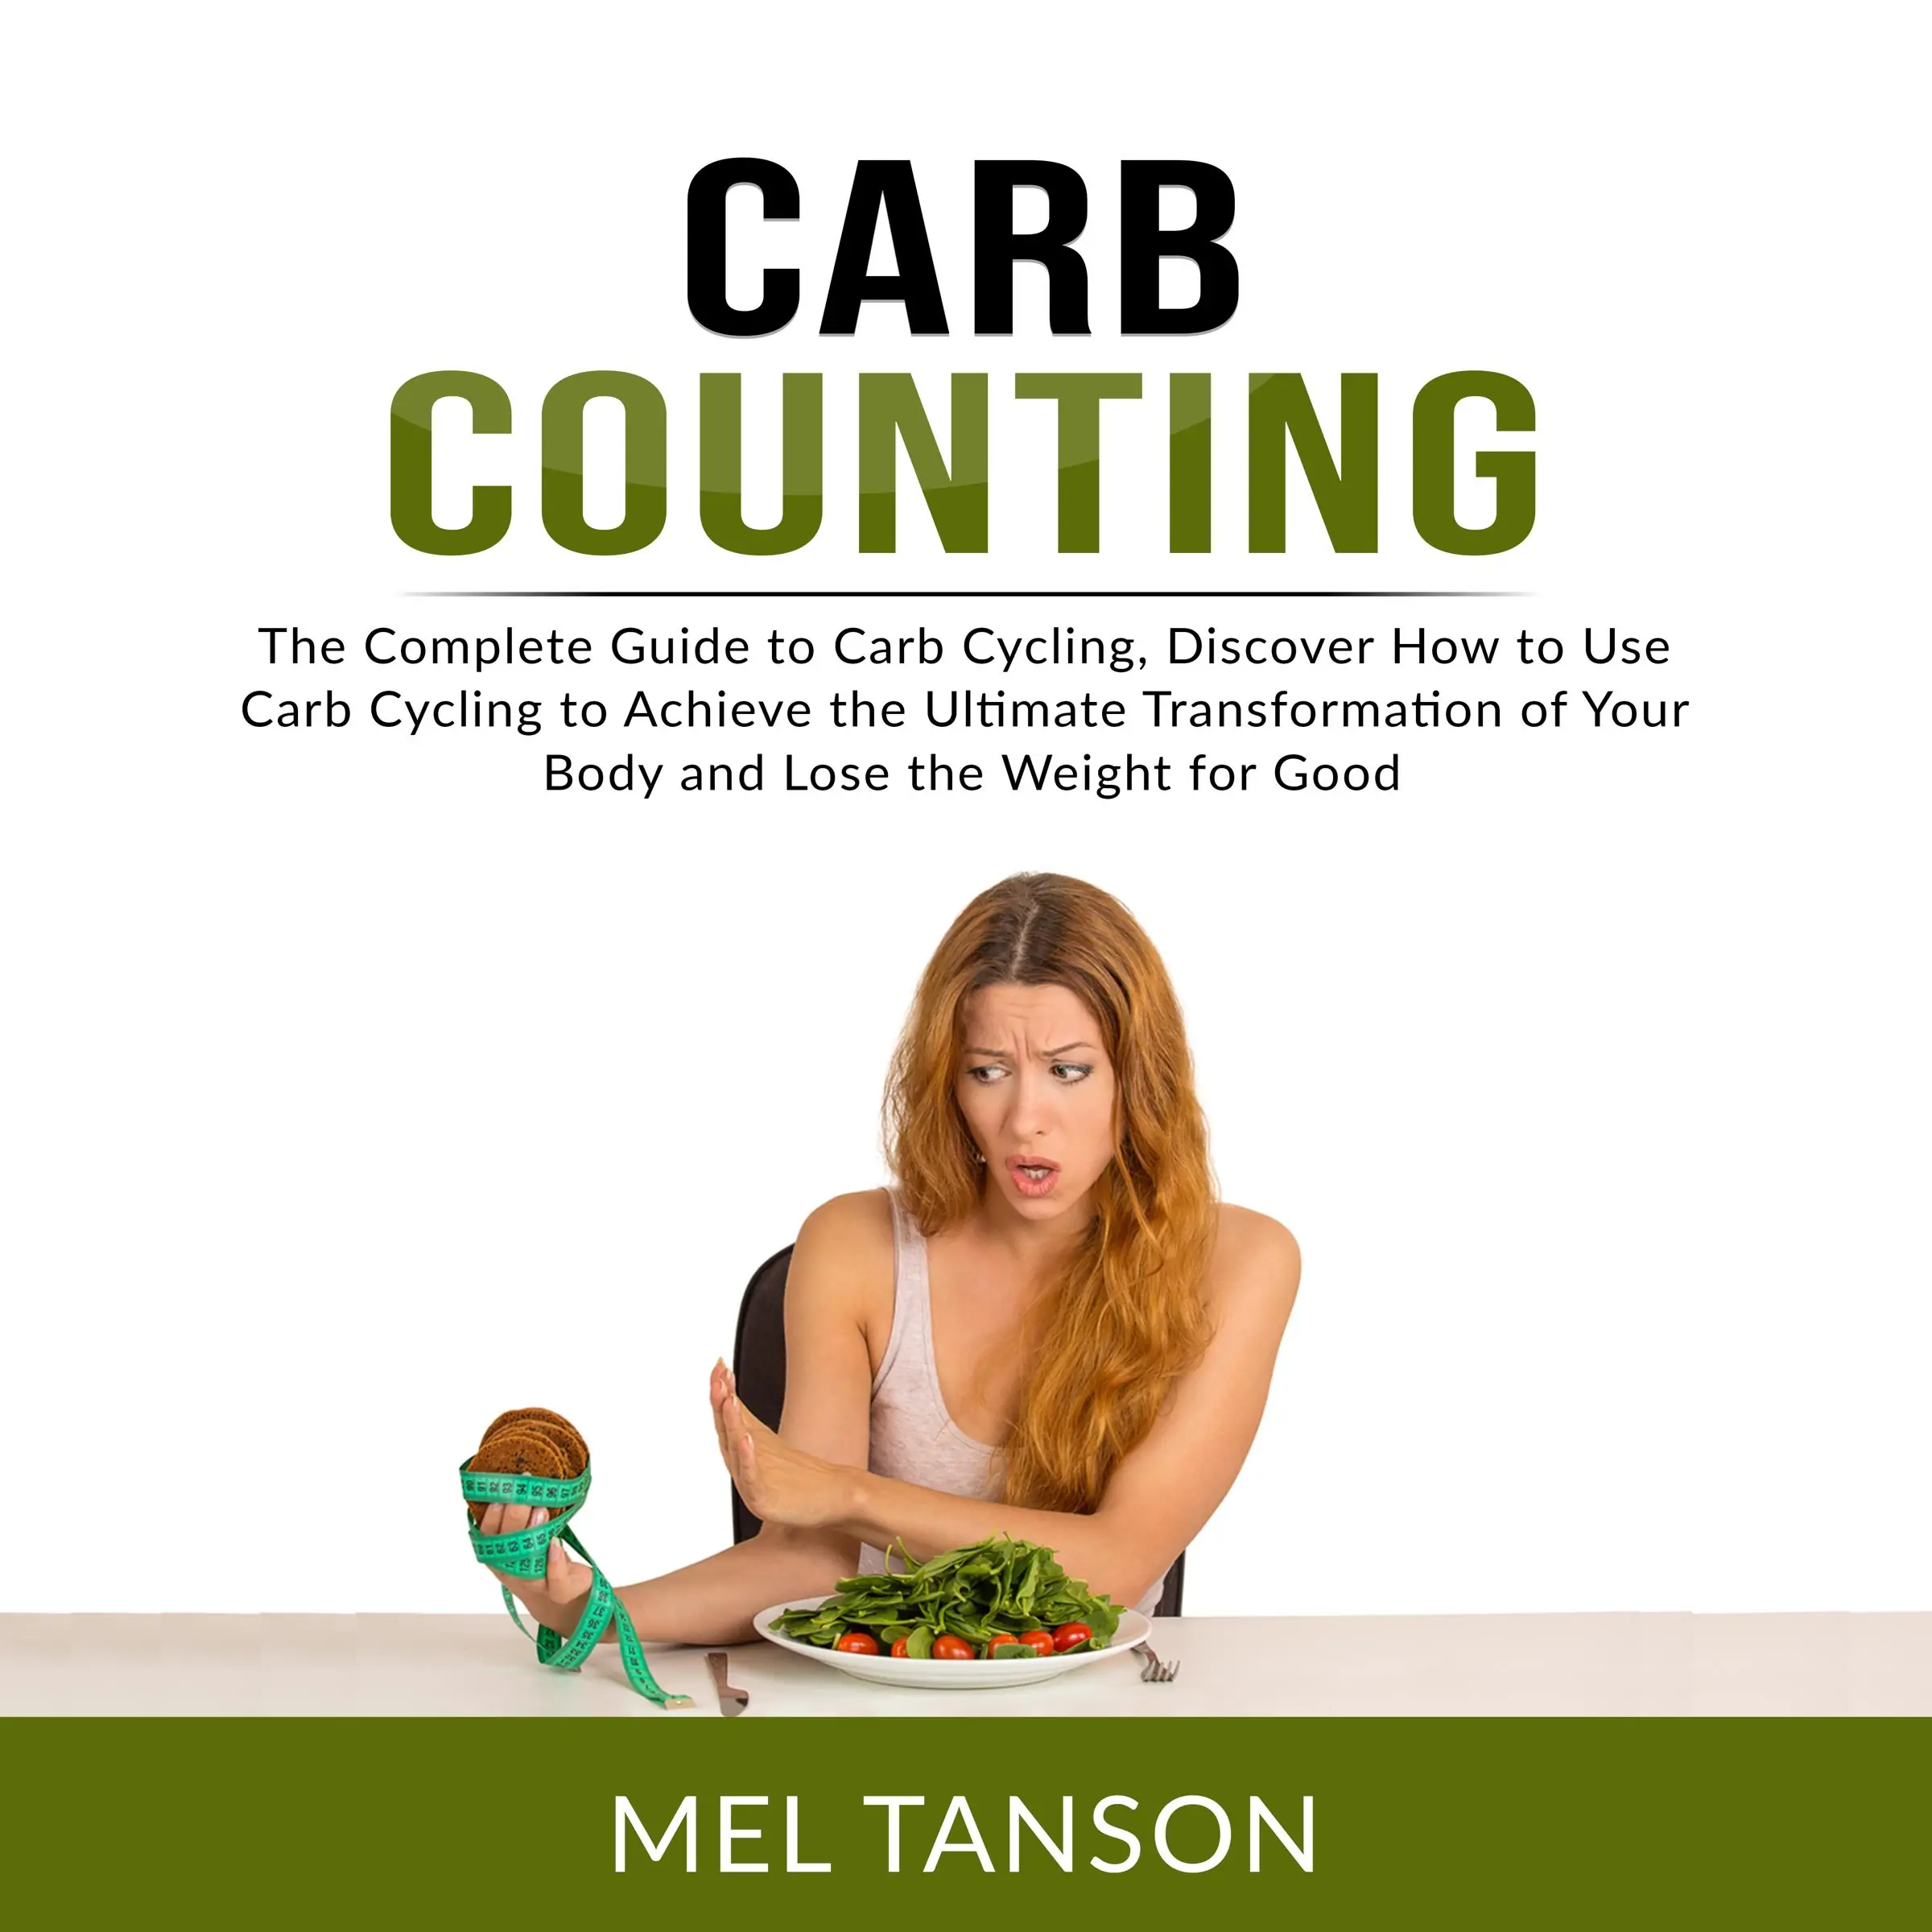 Carb Counting: The Complete Guide to Carb Cycling, Discover How to Use Carb Cycling to Achieve the Ultimate Transformation of Your Body and Lose the Weight for Good Audiobook by Mel Tanson